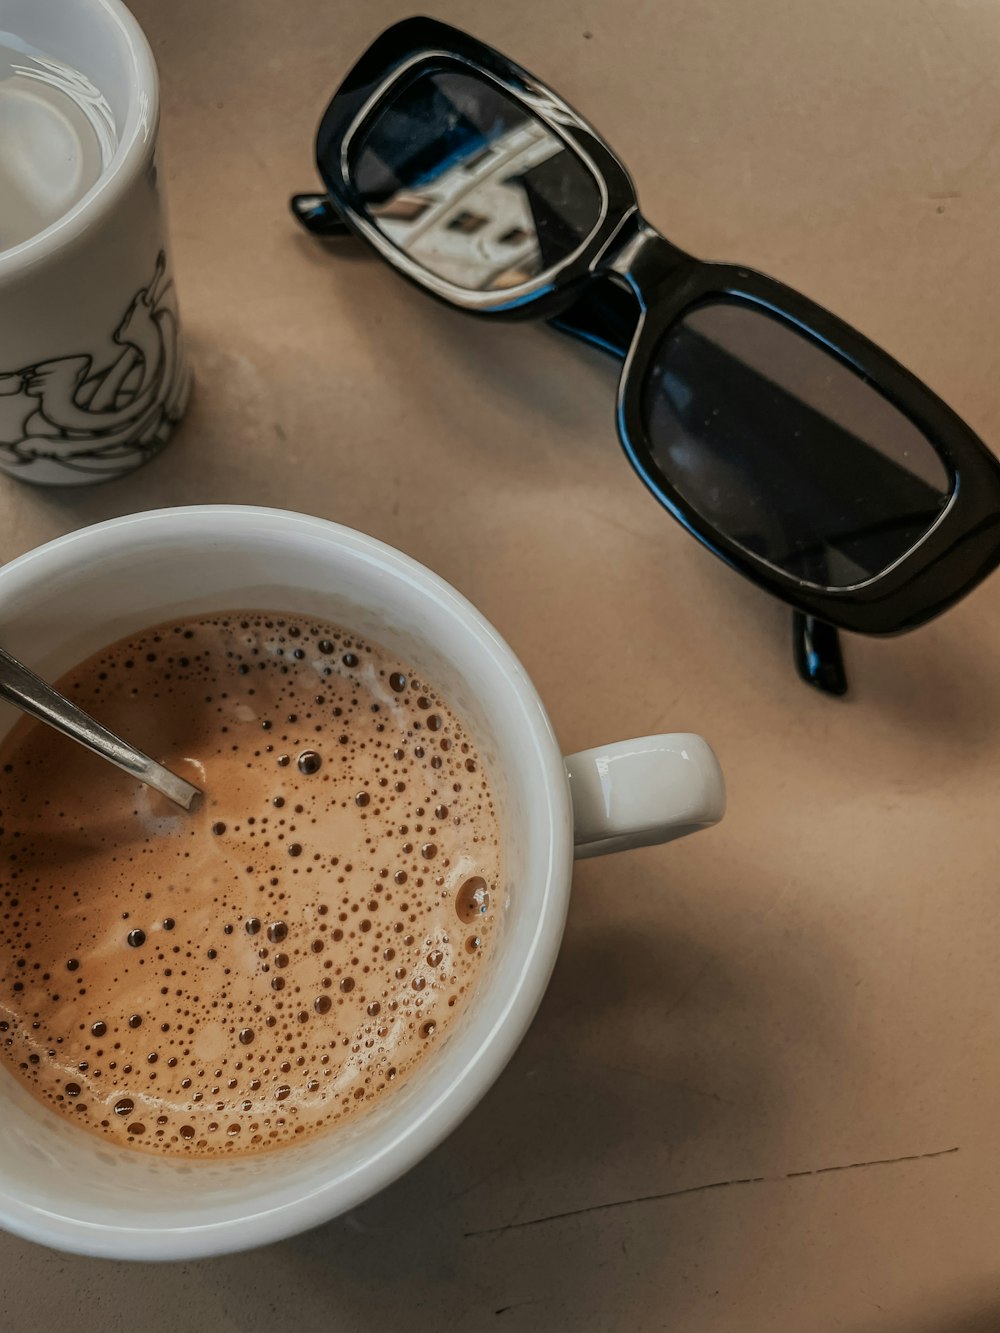 a cup of coffee next to a pair of glasses